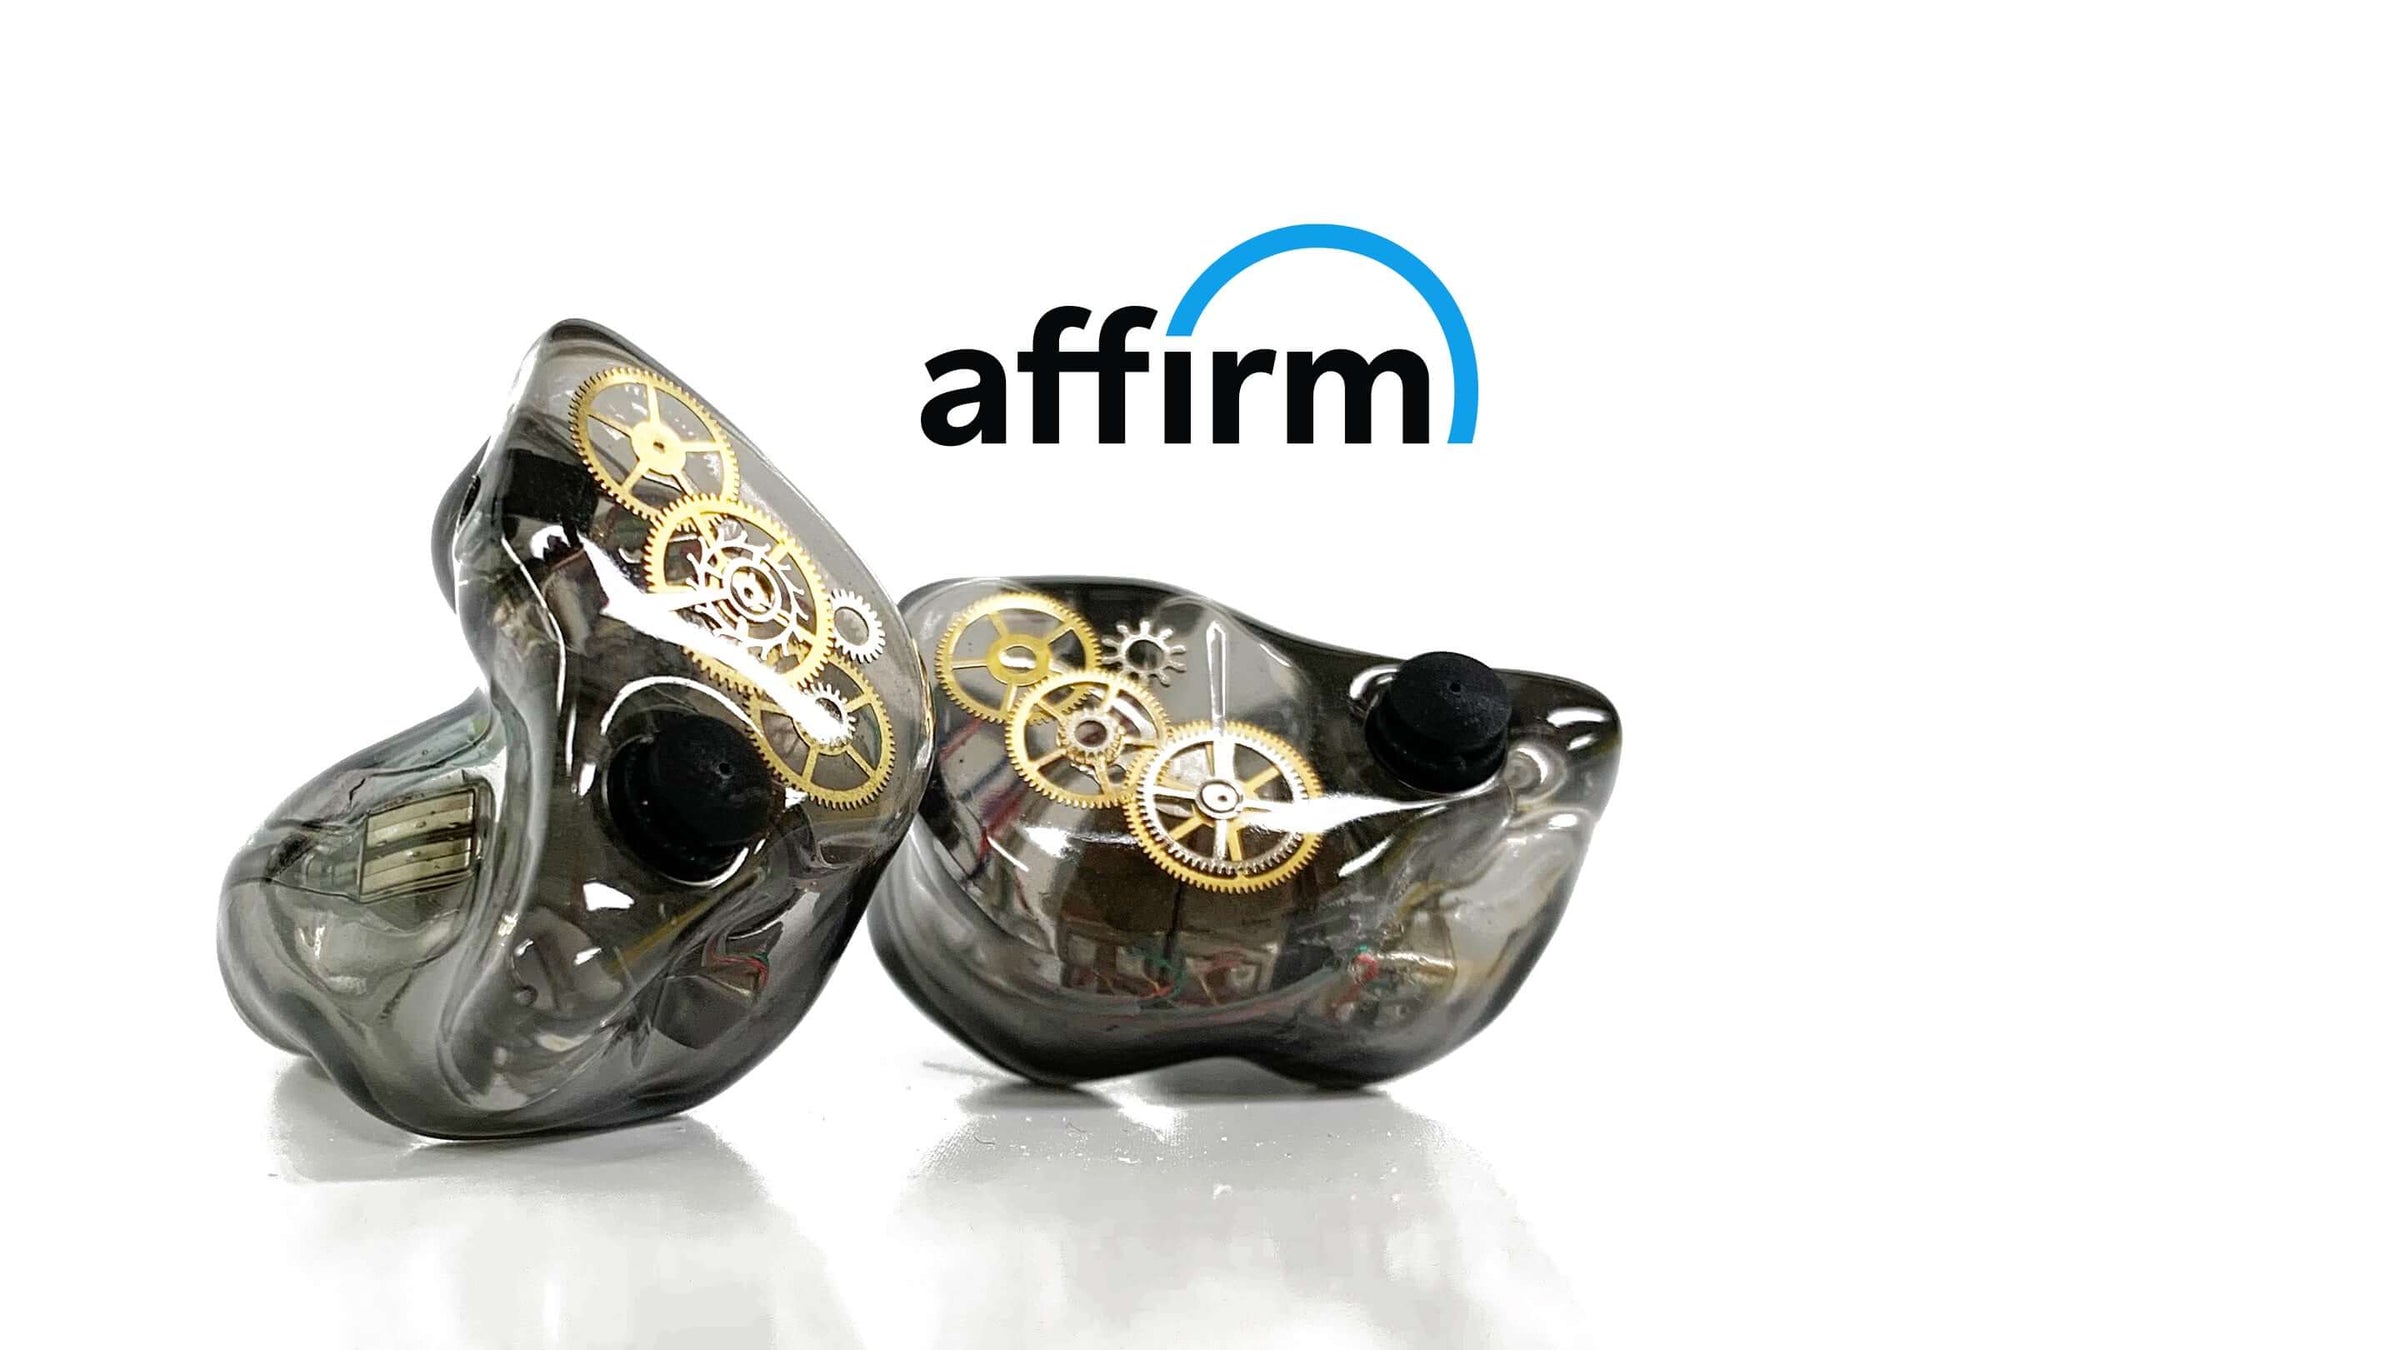 Inearz in ear monitors with affirm logo